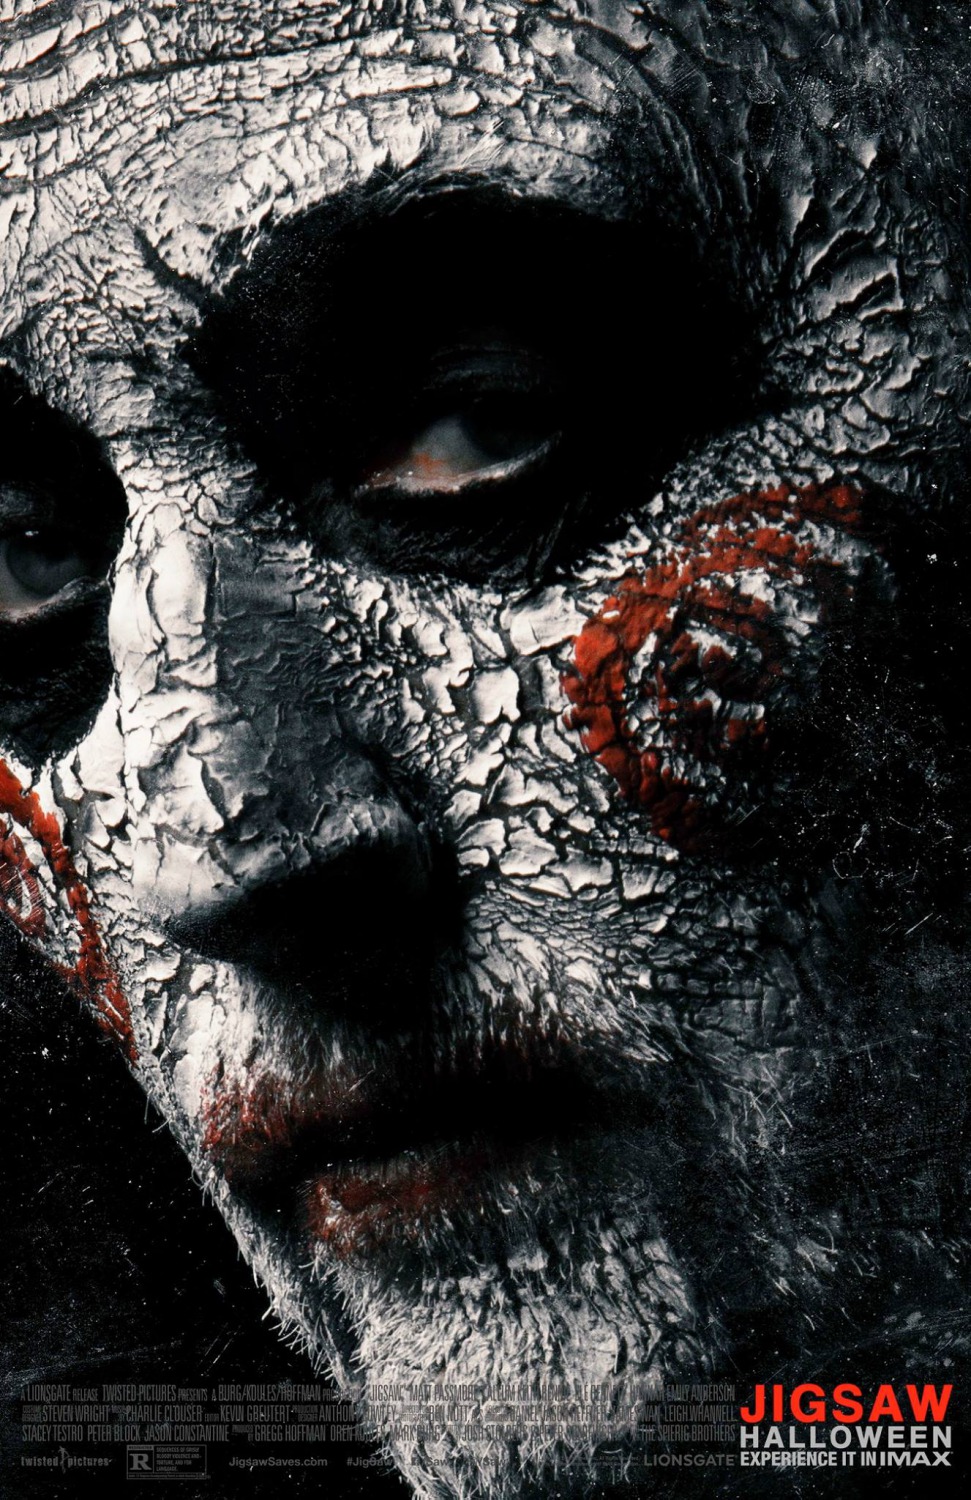 Extra Large Movie Poster Image for Jigsaw (#16 of 28)